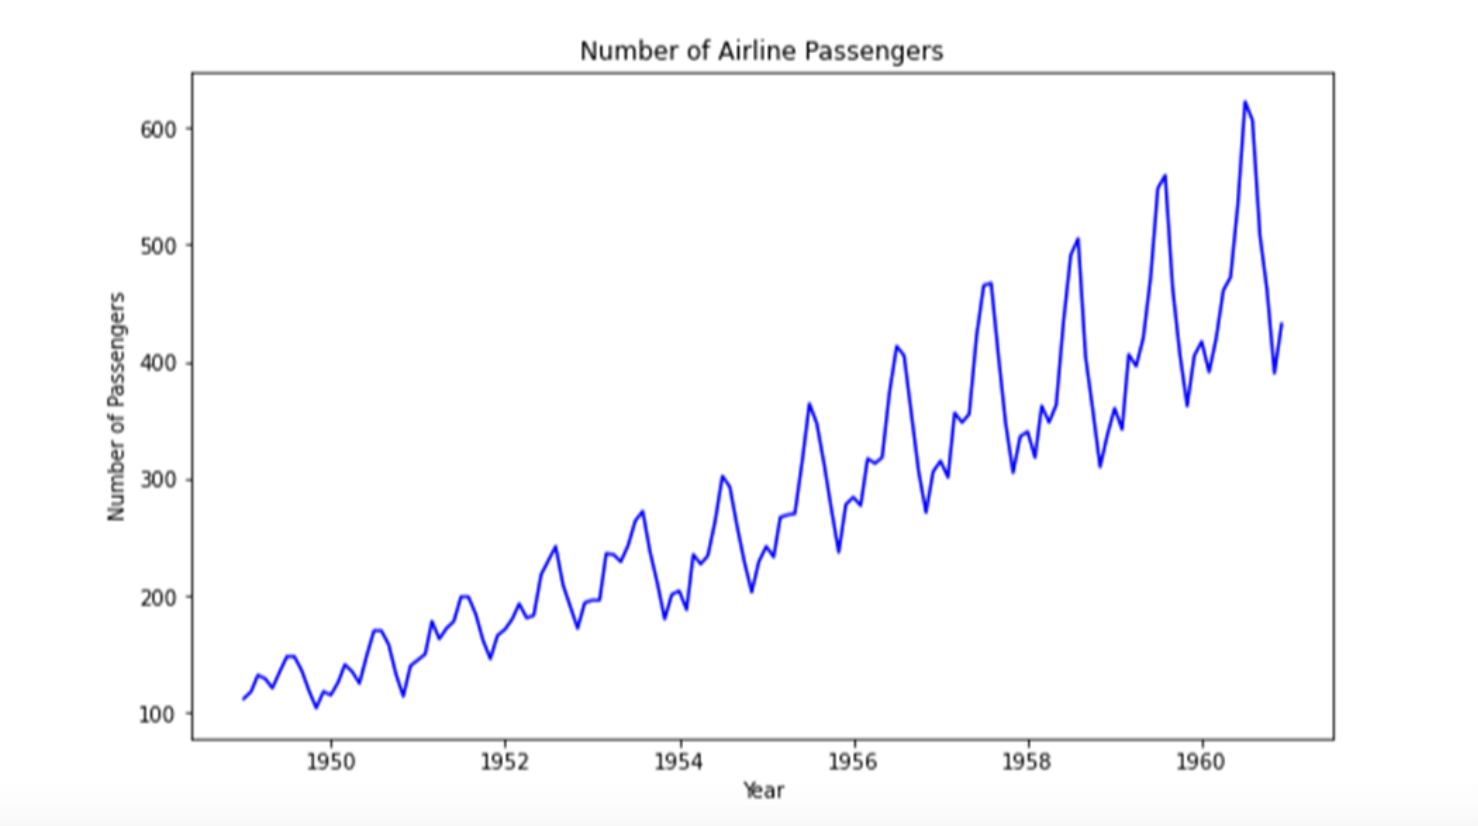 A time series graph of the number of airline passengers made with Python